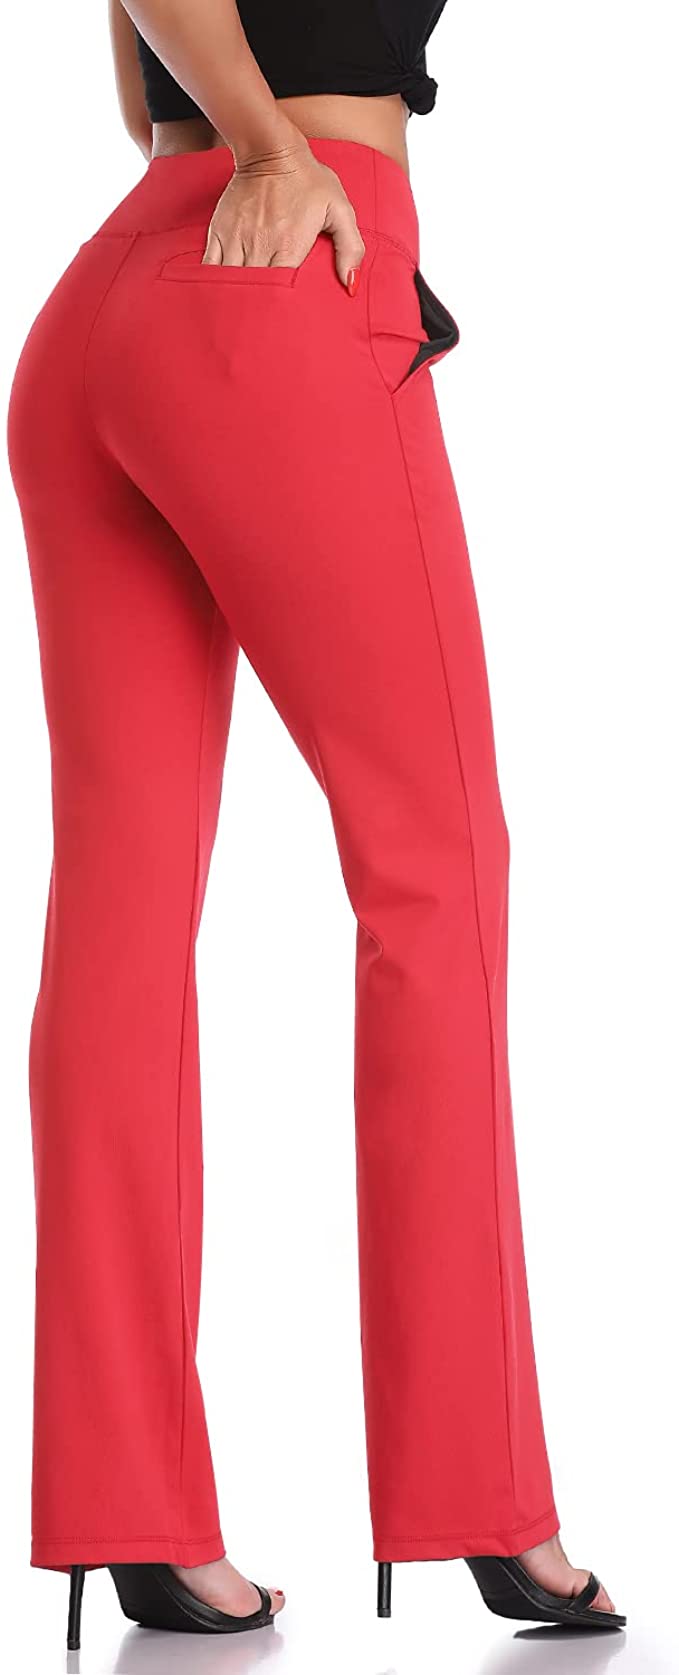 DAYOUNG Stretchy Flared Bootleg Women’s Red Yoga Pants